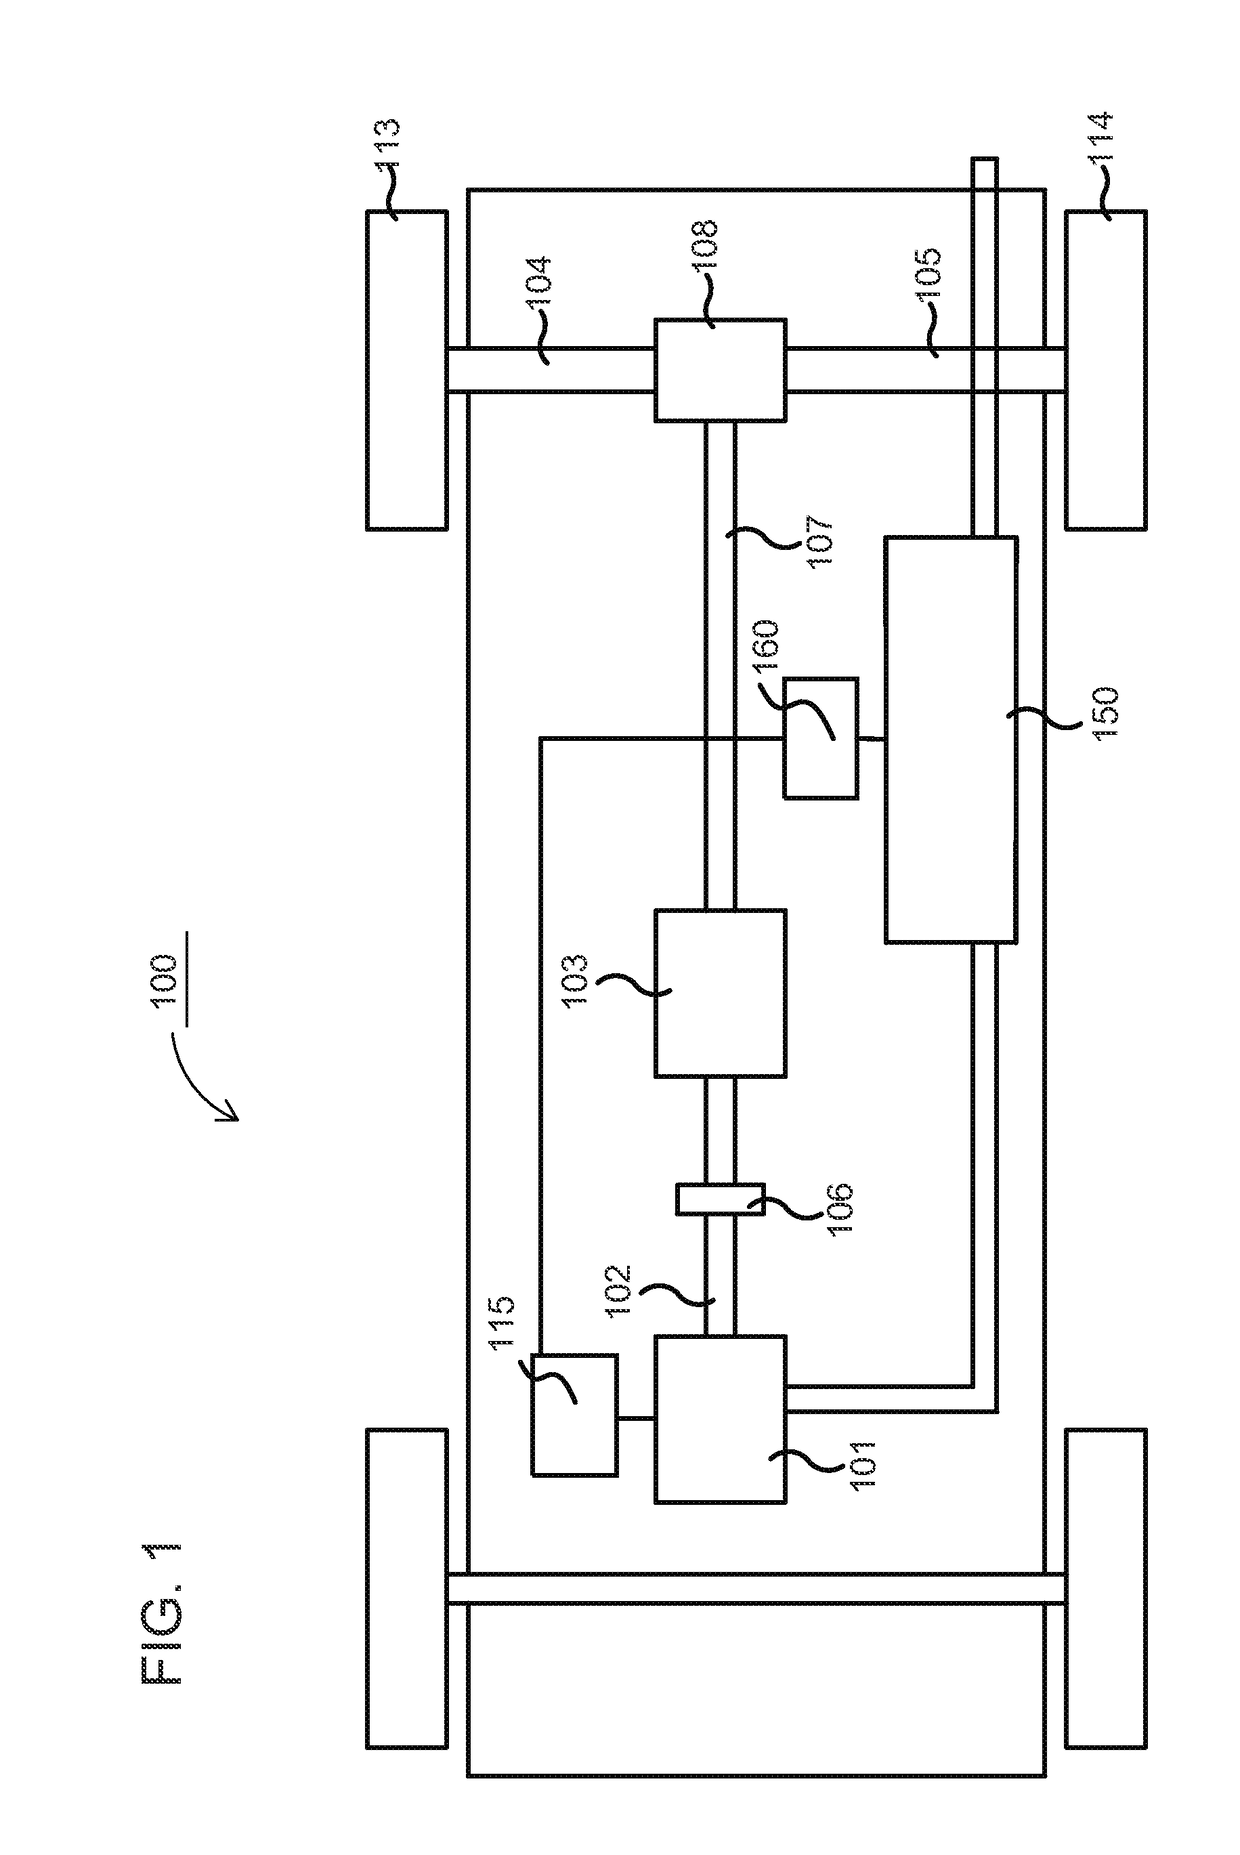 Method and exhaust treatment system for treatment of an exhaust gas stream